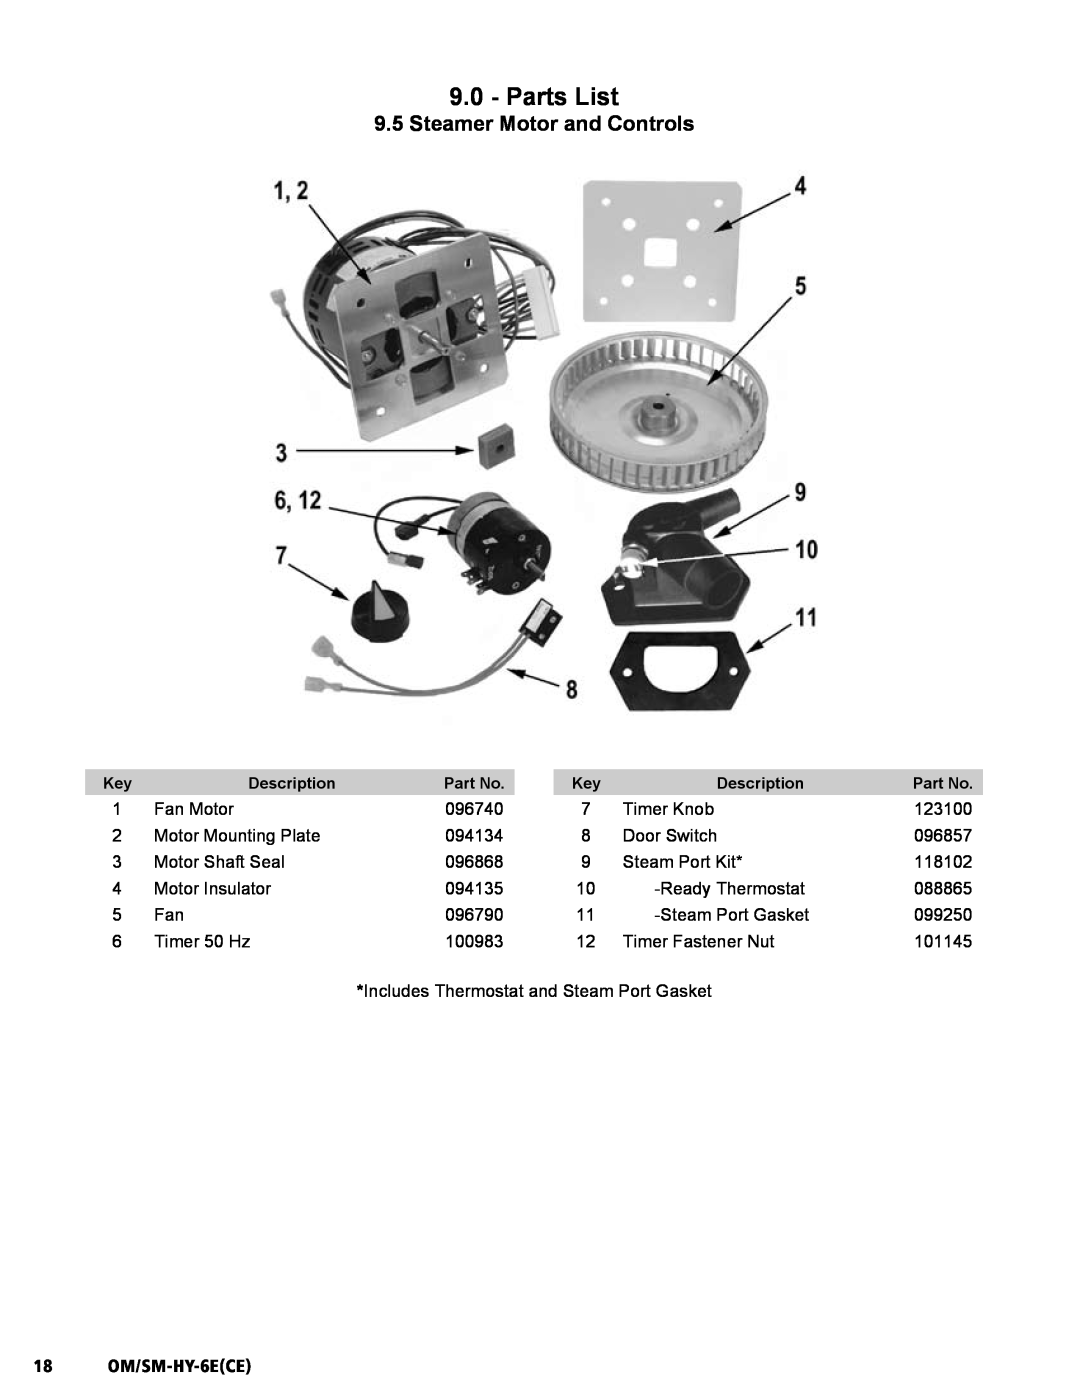 Unified Brands HY-6E(CE) service manual 9.5Steamer Motor and Controls, Parts List, 18 OM/SM-HY-6ECE 